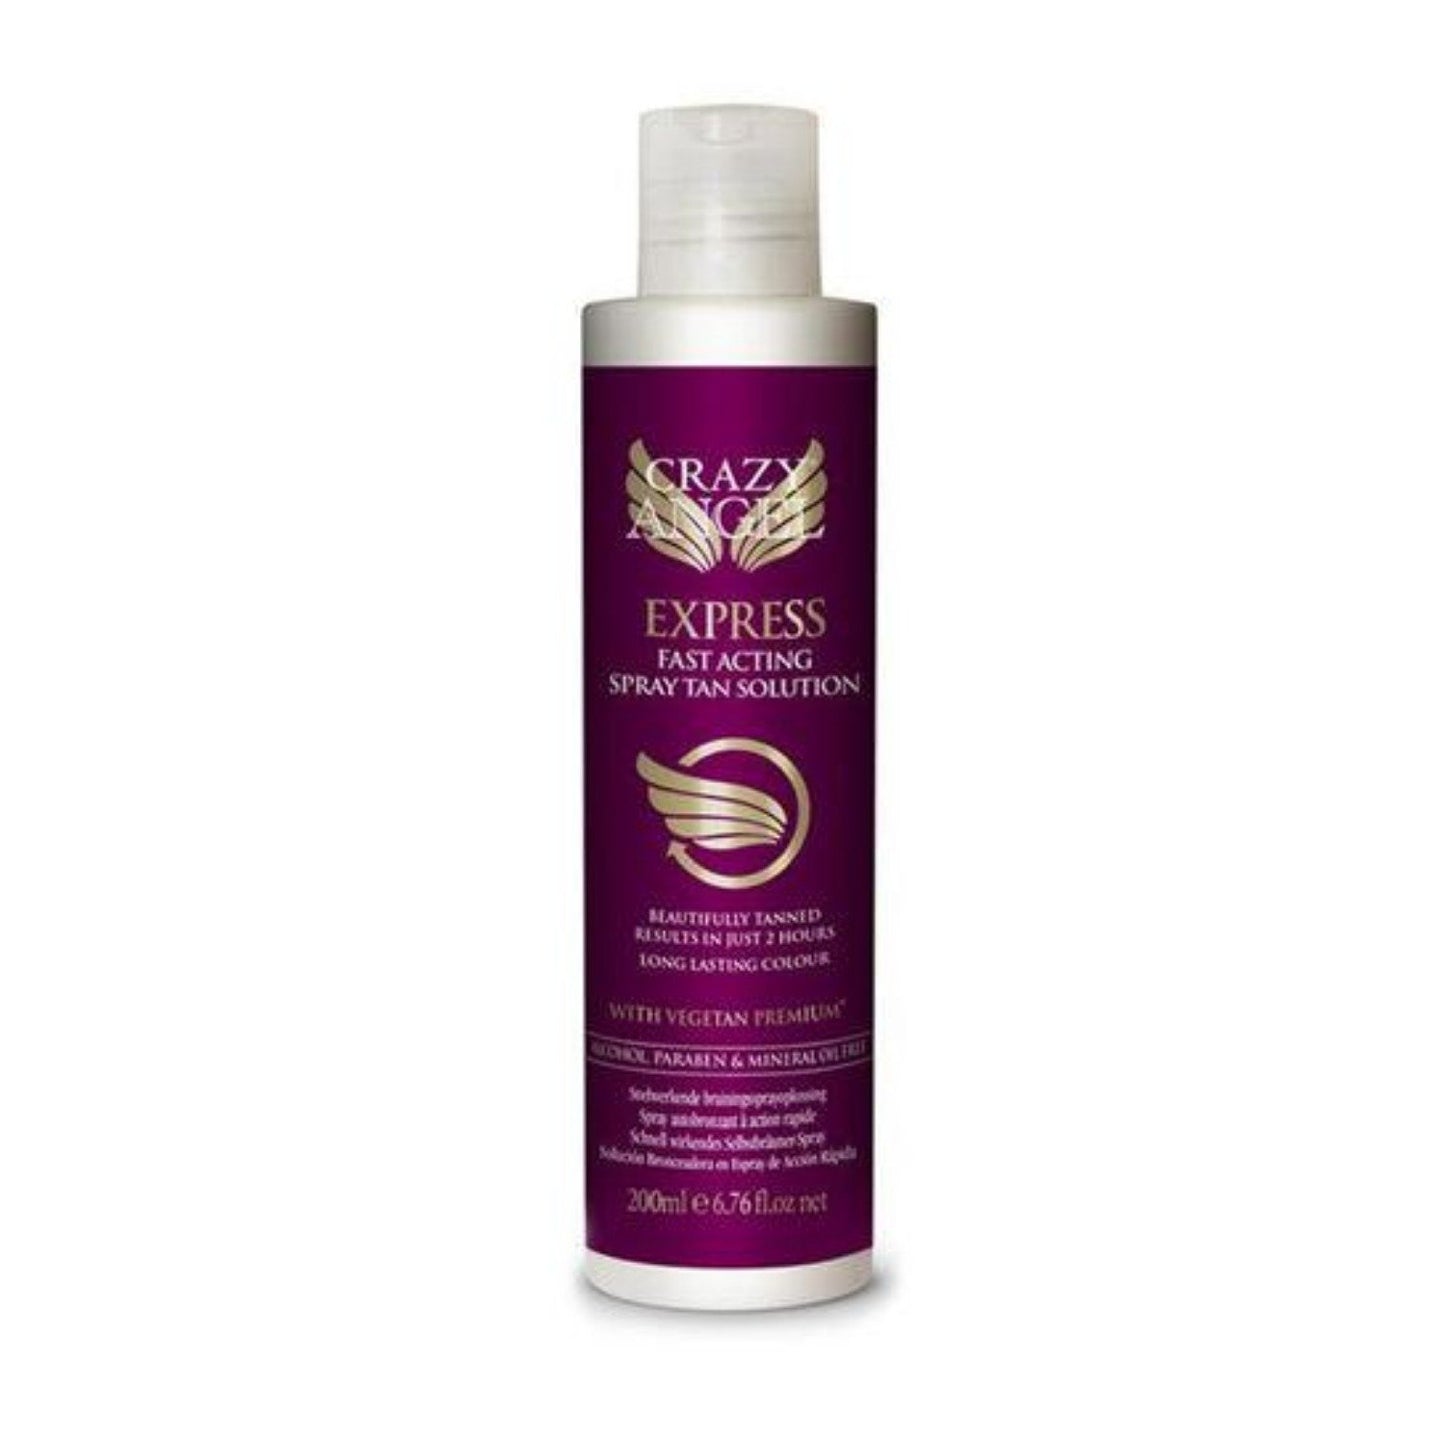 Crazy Angel Express Fast Acting Tan Solution 200ml (SHOP)